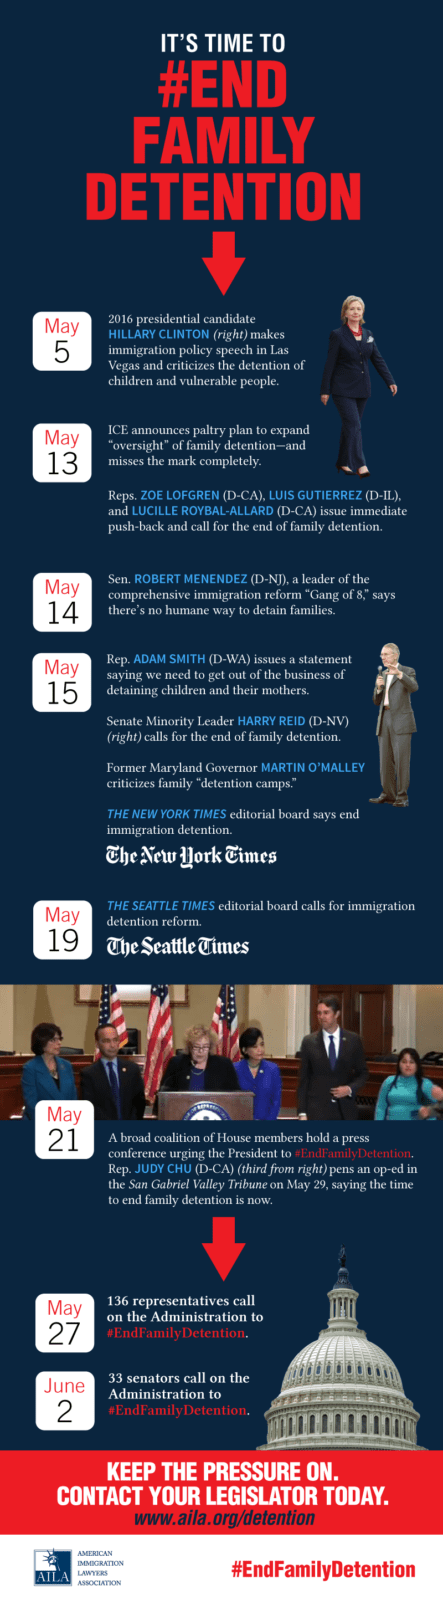 Infographic of timeline of people standing up against family detention